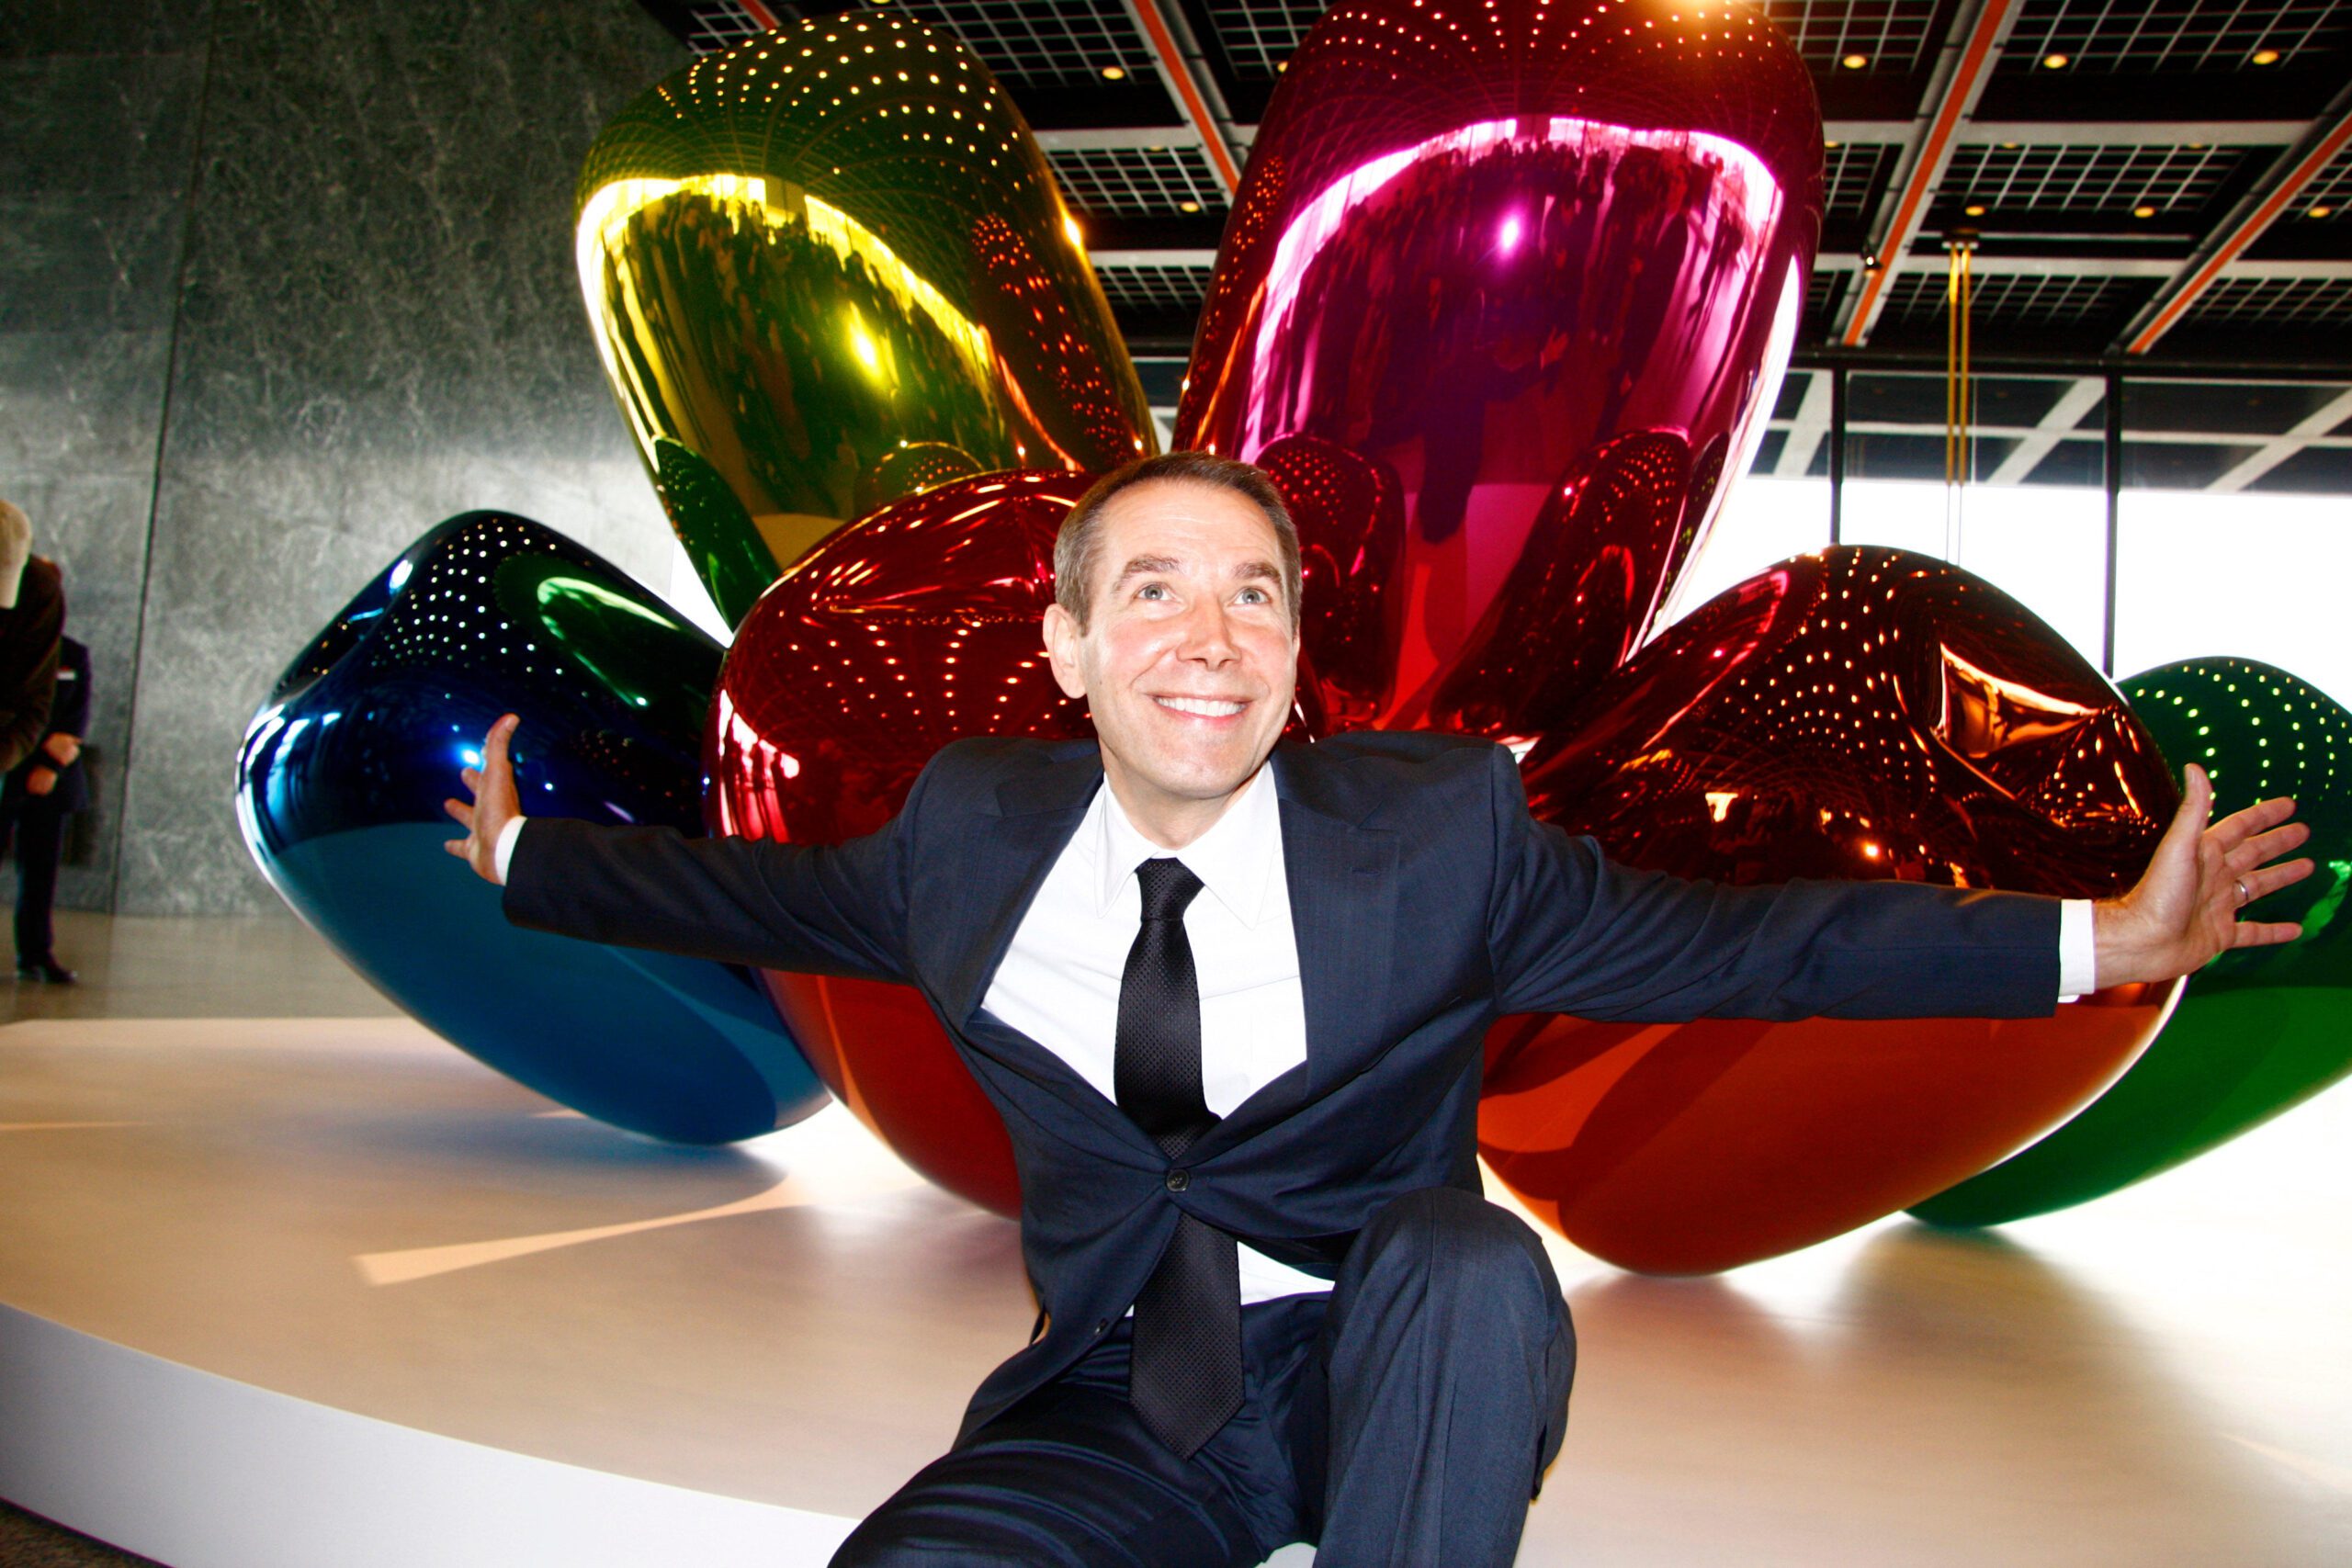 Jeff Koons in front of the sculpture "Tulips" at the presentation of his solo exhibition title. 360b / Alamy Stock Photo